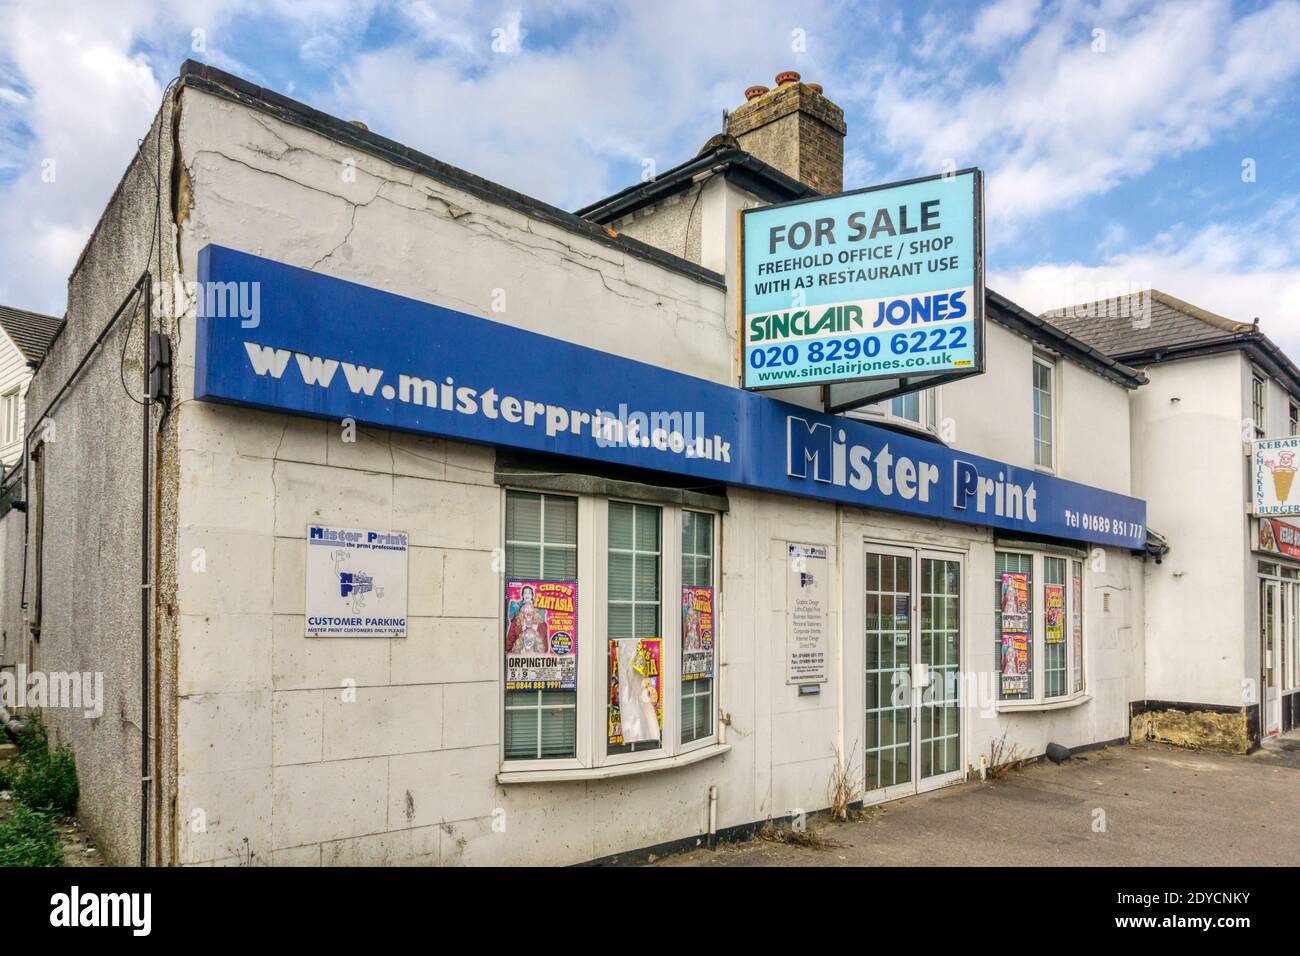 Old Mister Print shop in Orpington for sale as office or shop and with A3 restaurant use planning permission. Stock Photo